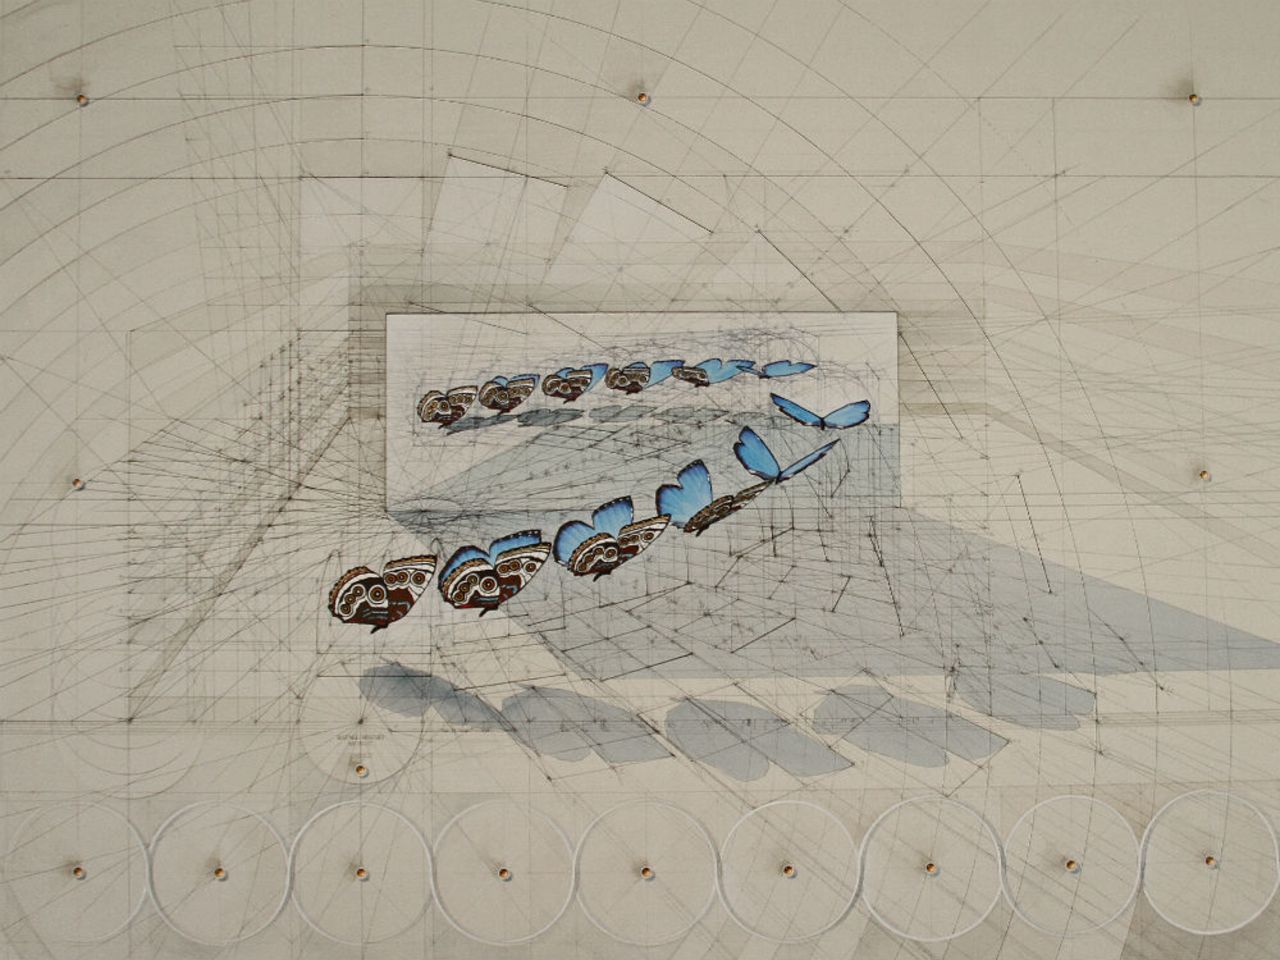 Araujo begins many of his drawings by creating a scaffolding, which helps guide his lines.